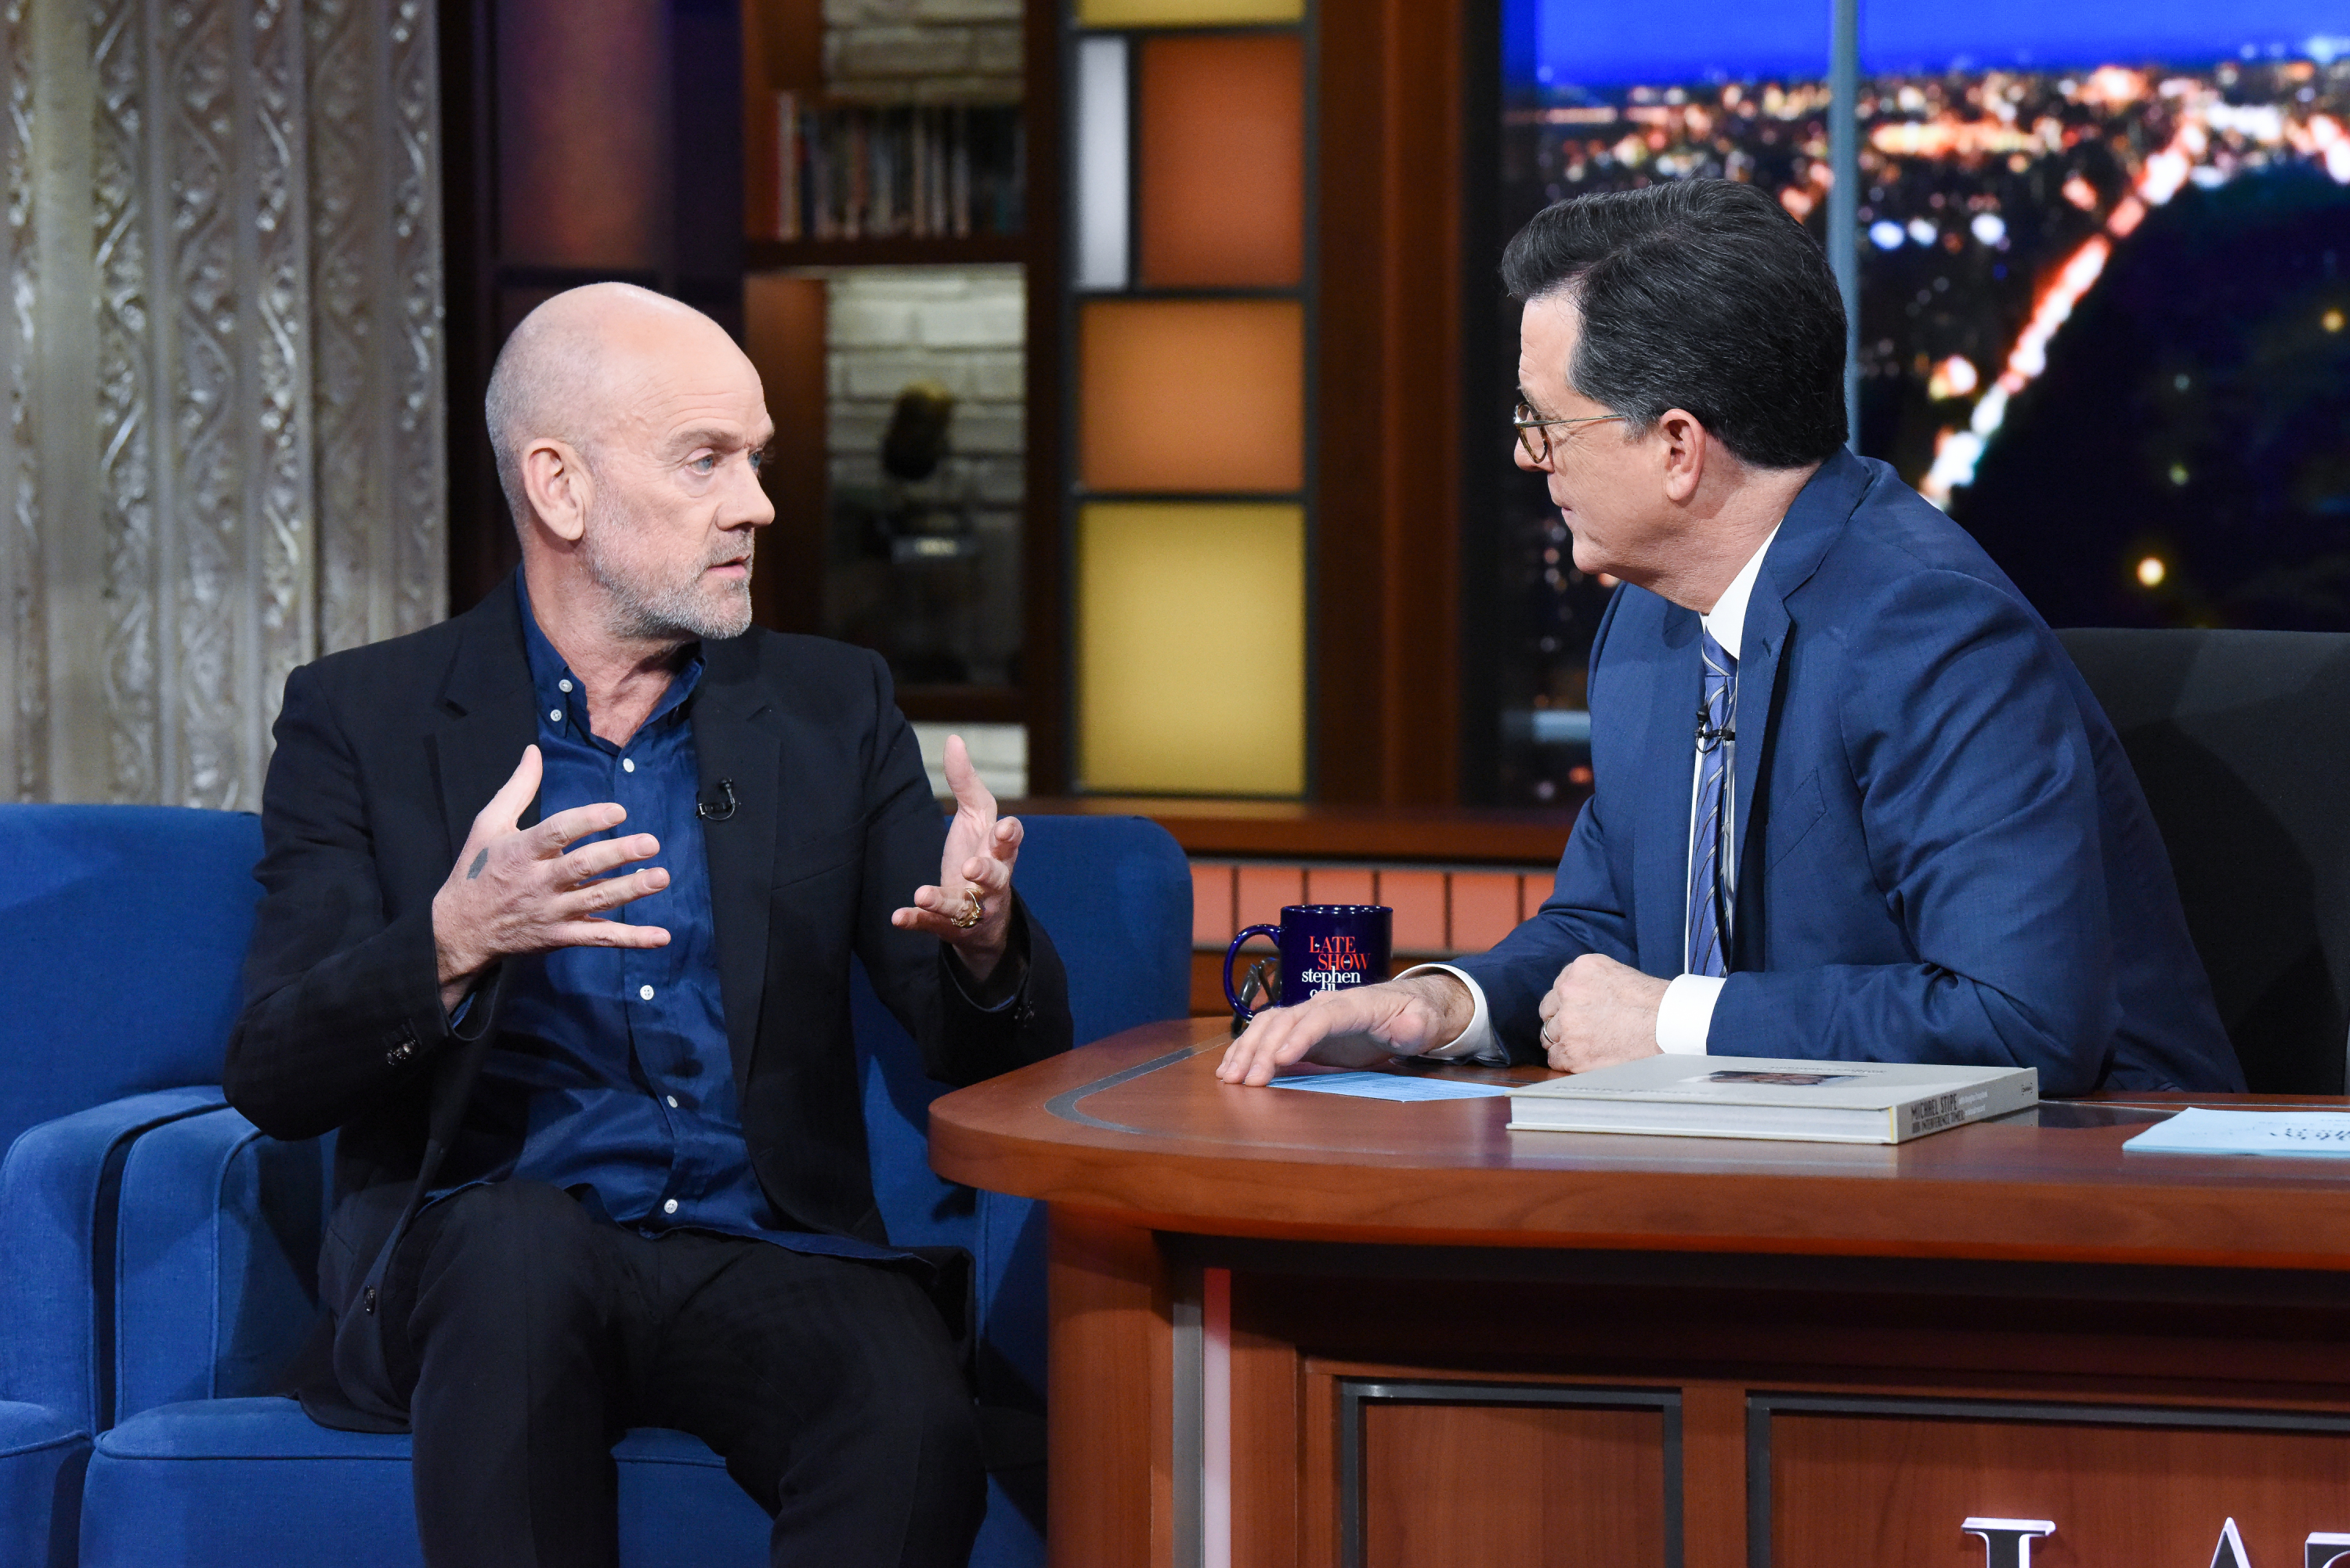 Michael Stipe on Late Show With Stephen Colbert, January 30, 2020